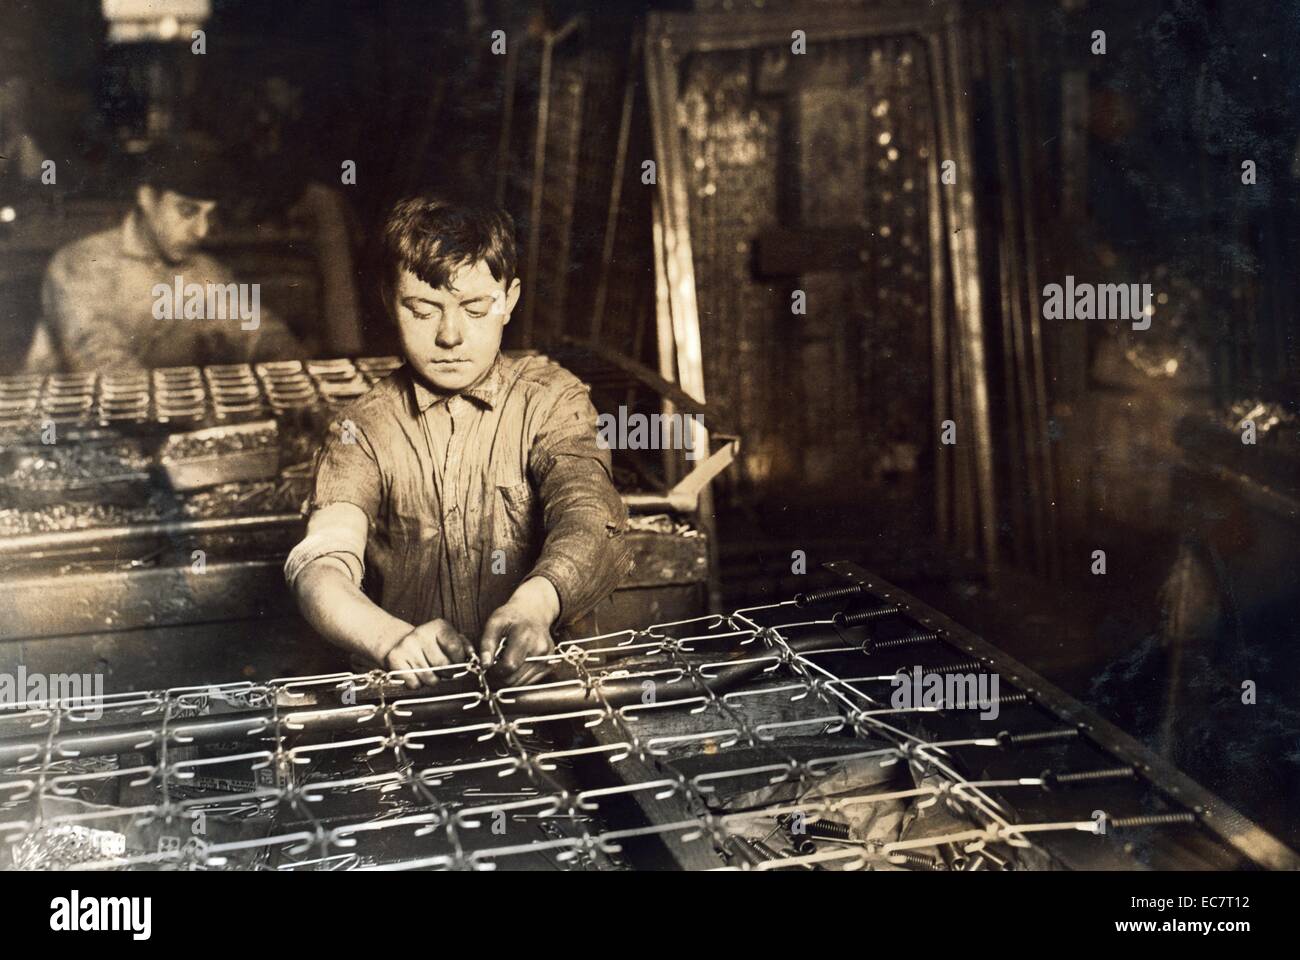 Boys 'linking' bed-springs. 14 and 15 years old boys employed as child labour in Boston; Massachusetts Stock Photo